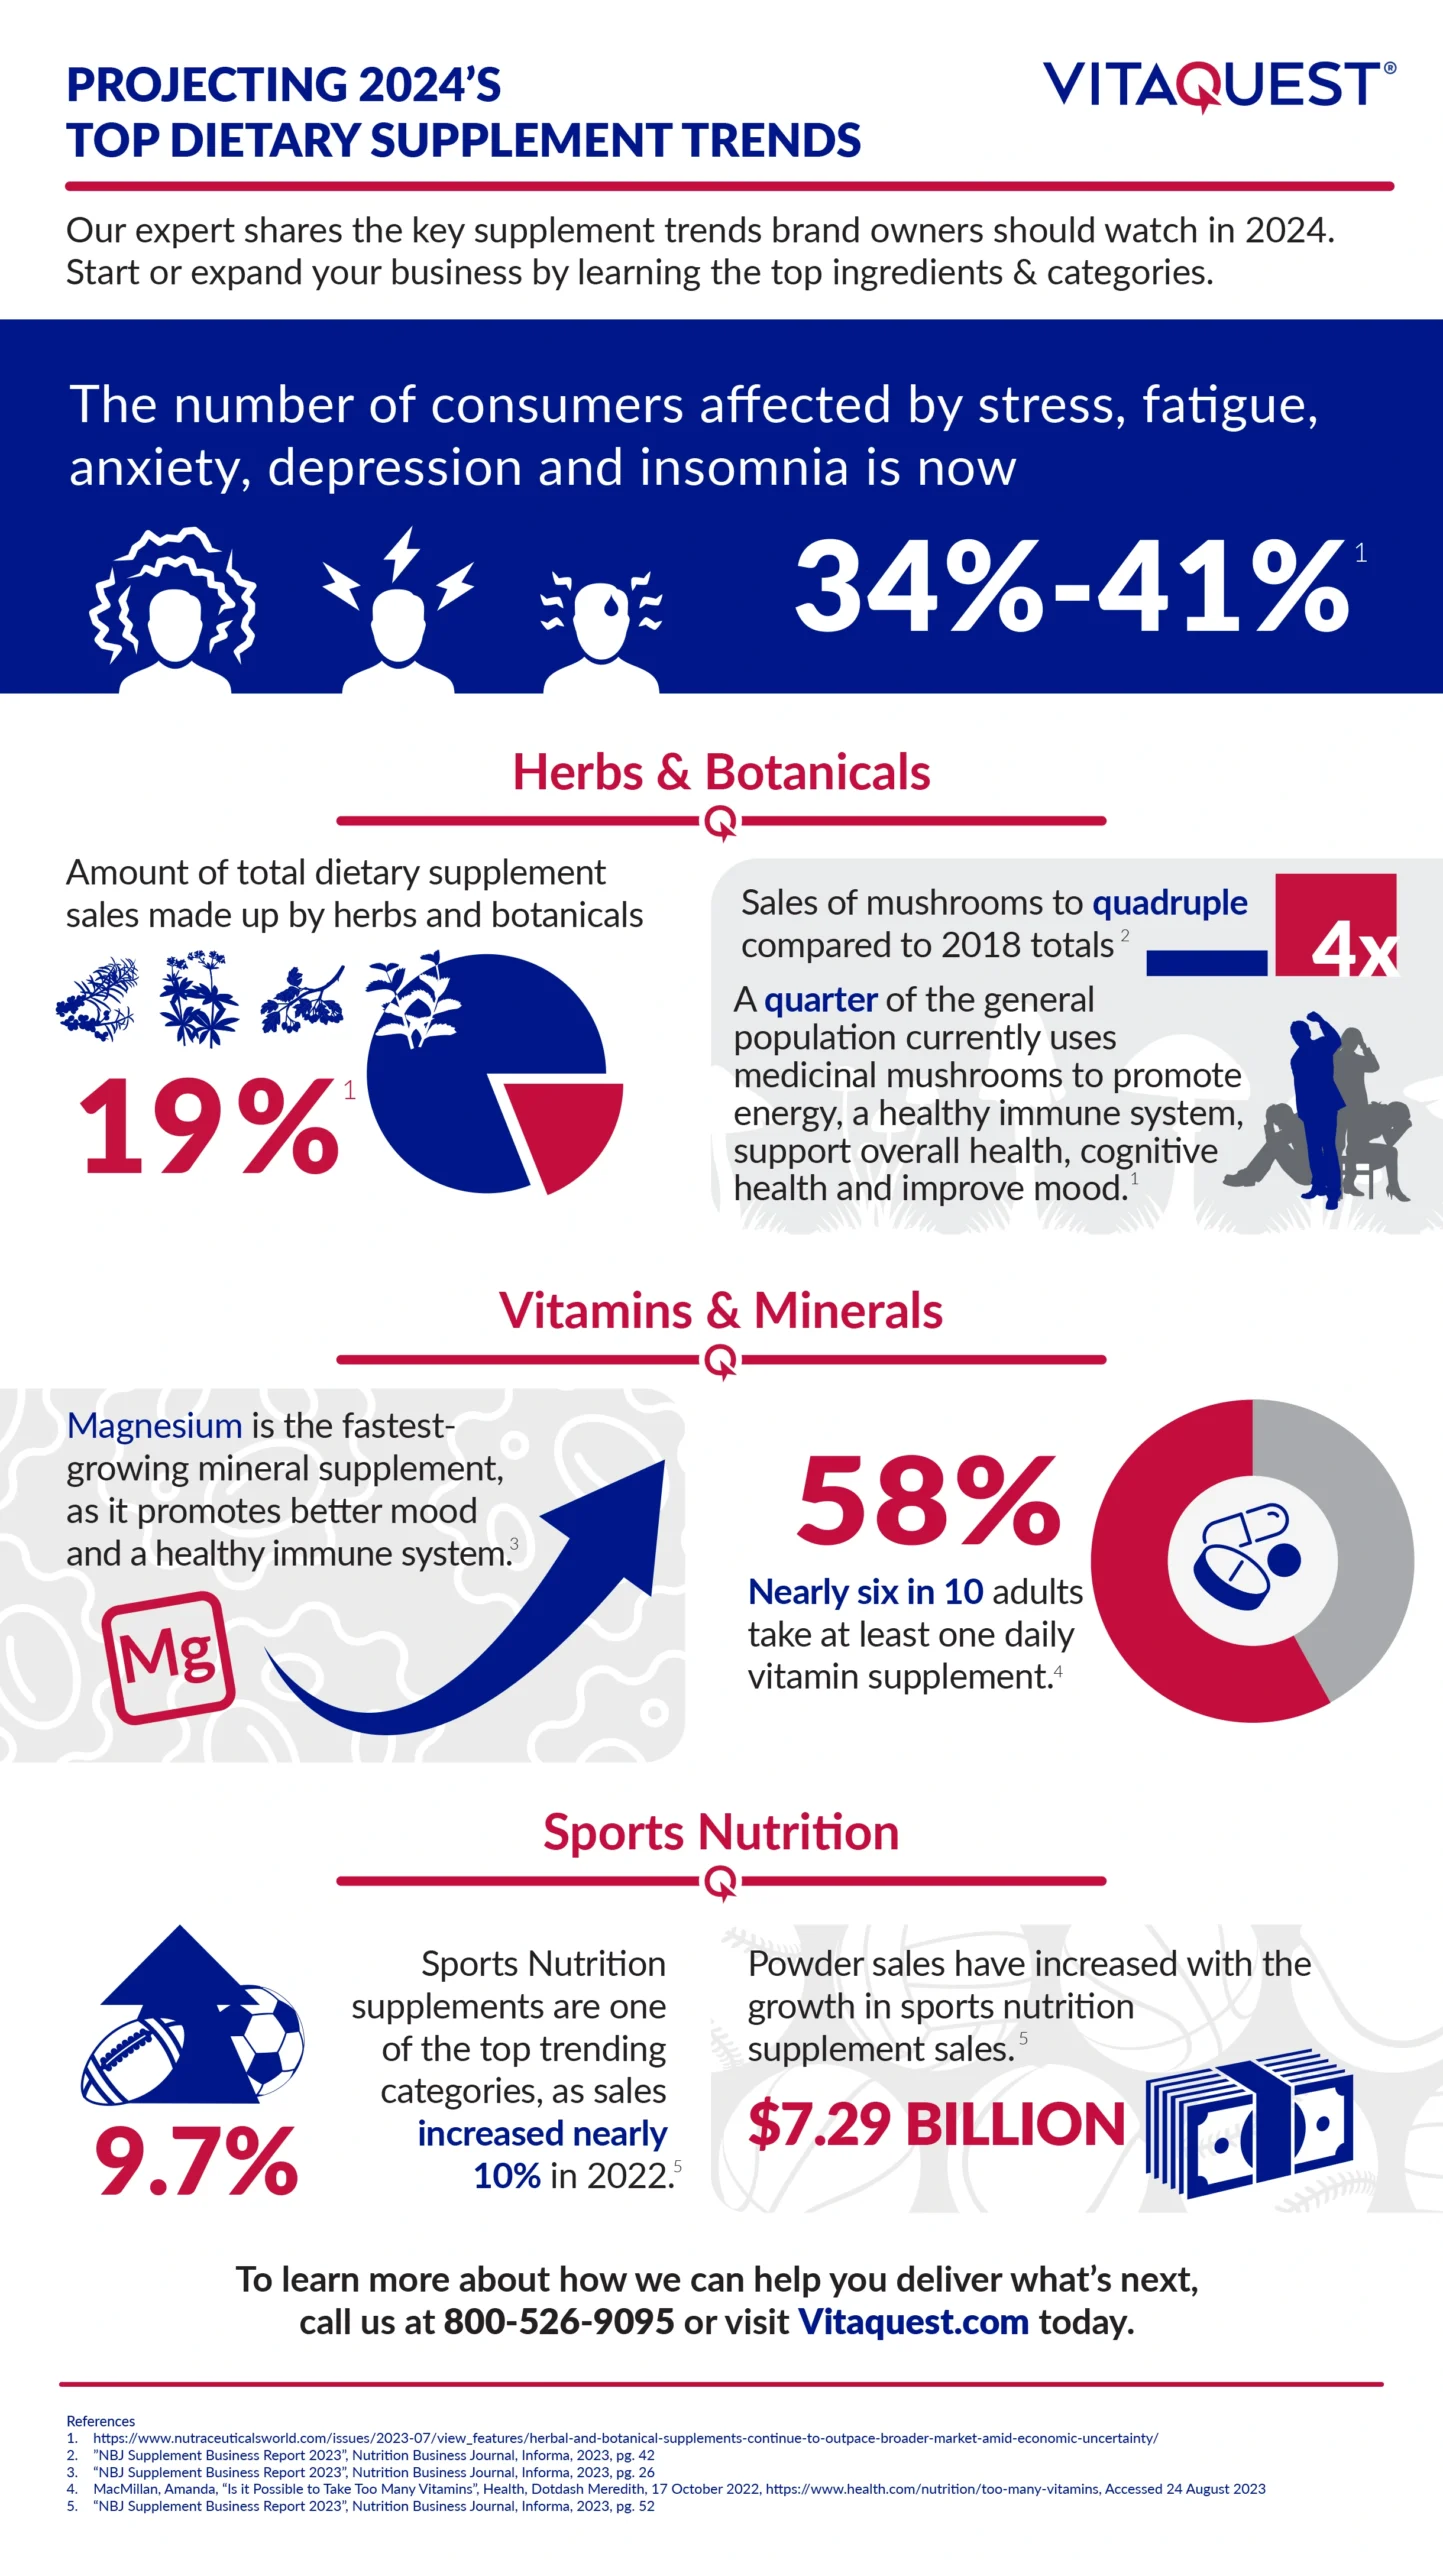 Vitaquest experts project the 2024 dietary supplement manufacturing and ingredient trends.